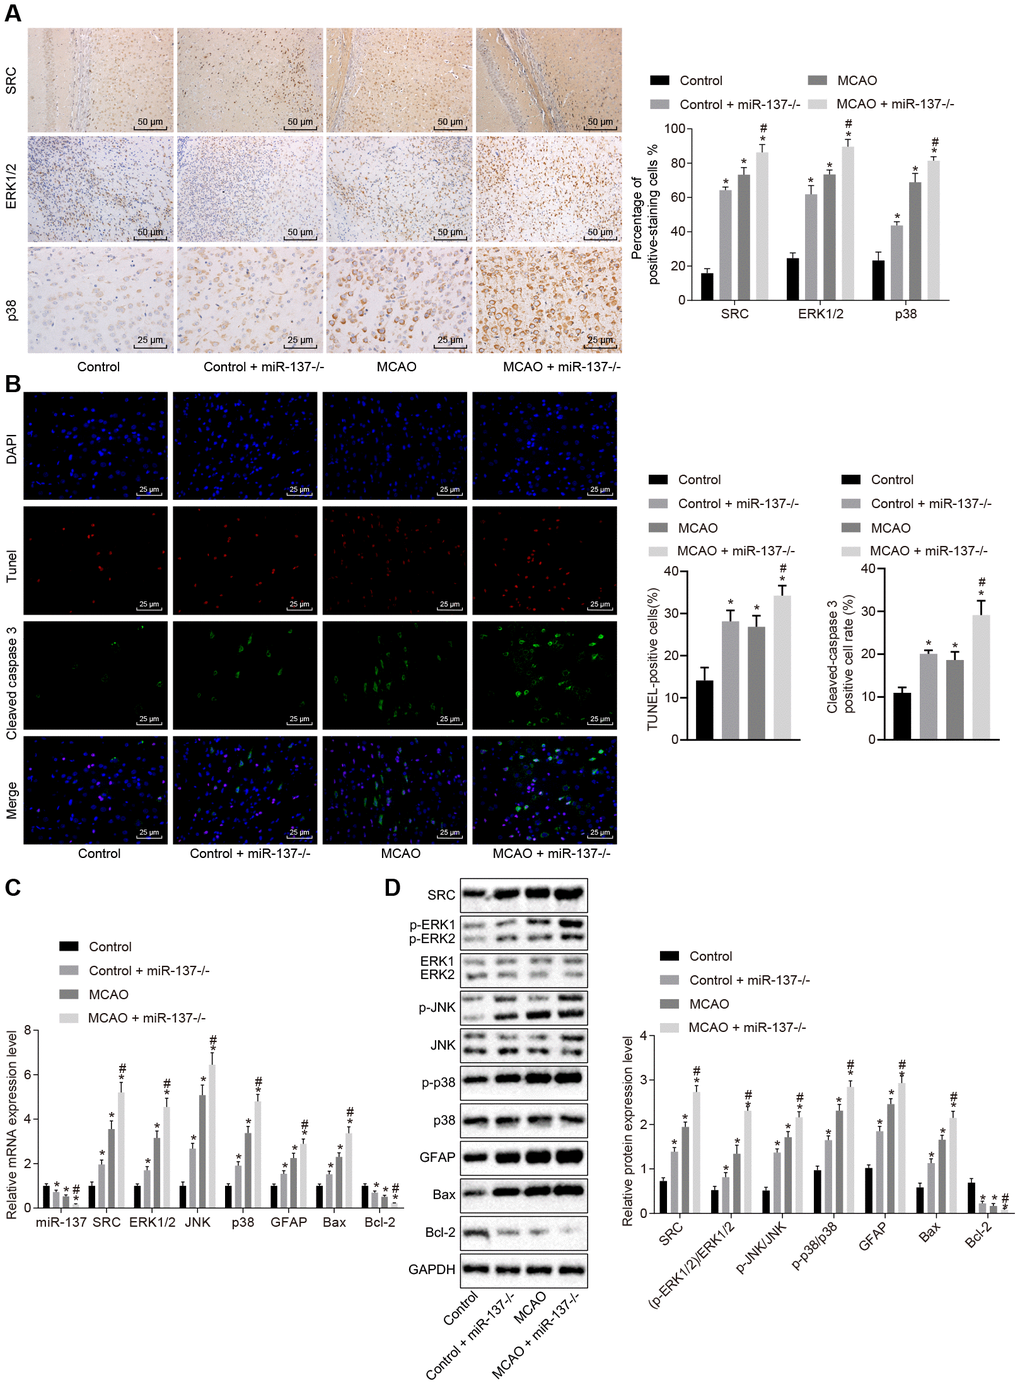 Downregulated miR-137 activates the MAPK signaling pathway and increases cell apoptosis by increasing Src expression. (A) ERK1/2, p38 and Src in the brain tissues of miR-137-/- mice by immunohistochemistry (× 200); (B) immunofluorescence images of cleaved caspase 3, TUNEL staining, and DAPI staining in brain tissues from miR-137-/- mice (× 400); (C) mRNA levels of Erk2, Jnk, p38, Gfap, Bax and Bcl-2 in brain tissues from miR-137-/- mice detected using RT-qPCR; (D) protein levels of GFAP, Bax and Bcl-2 along with the extent of ERK1/2, JNK and p38 phosphorylation in brain tissues from miR-137-/- mice detected using Western blot analysis. Measurement data are expressed as mean ± standard deviation and compared using one-way ANOVA, followed by Tukey's post hoc test. * p vs. control group (sham-operated wild-type mice); # p vs. MCAO group (wild-type mouse models of MCAO). N = 15.